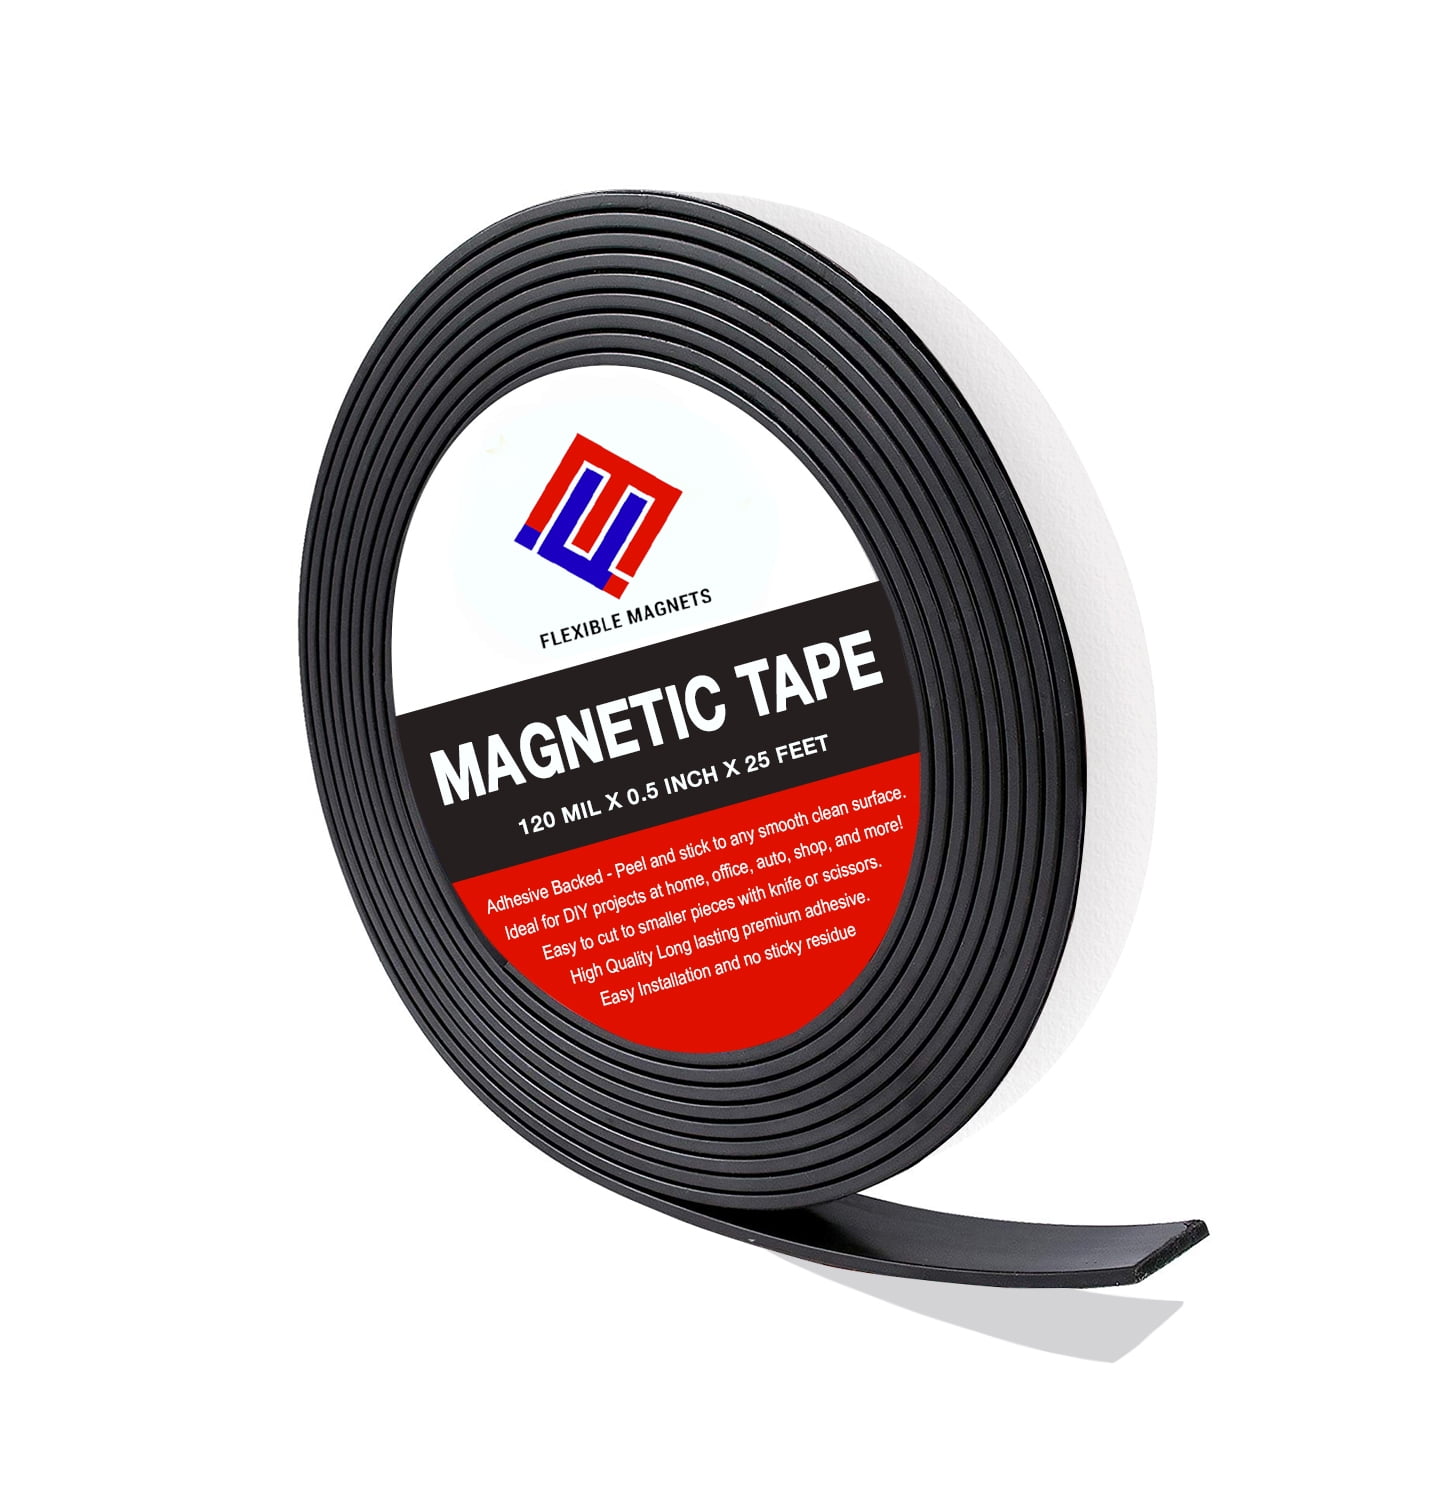 2 Flexible Magnetic Tape 05" x 12 Feet Magnetic Strip Roll Strong Self Adhesive 